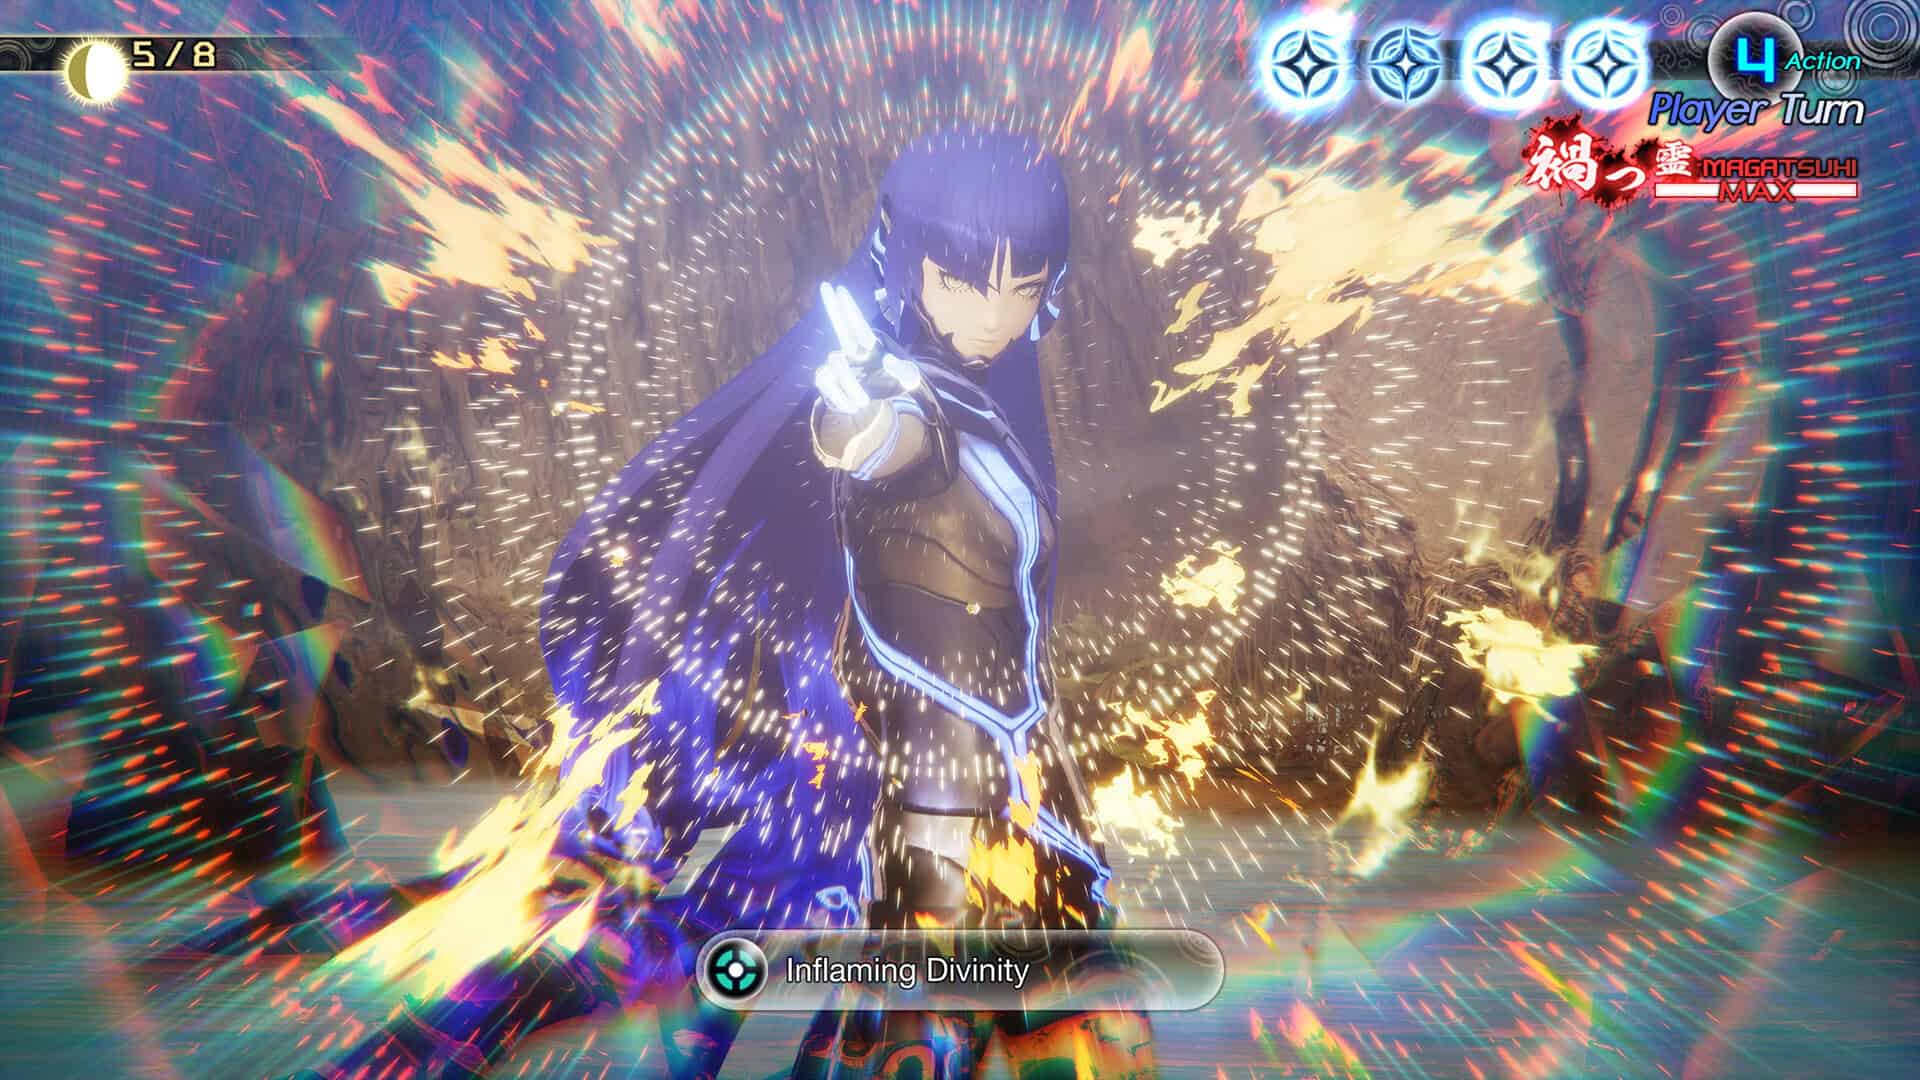 SMT v vengeance release date - a character with long blue hair uses magical attacks